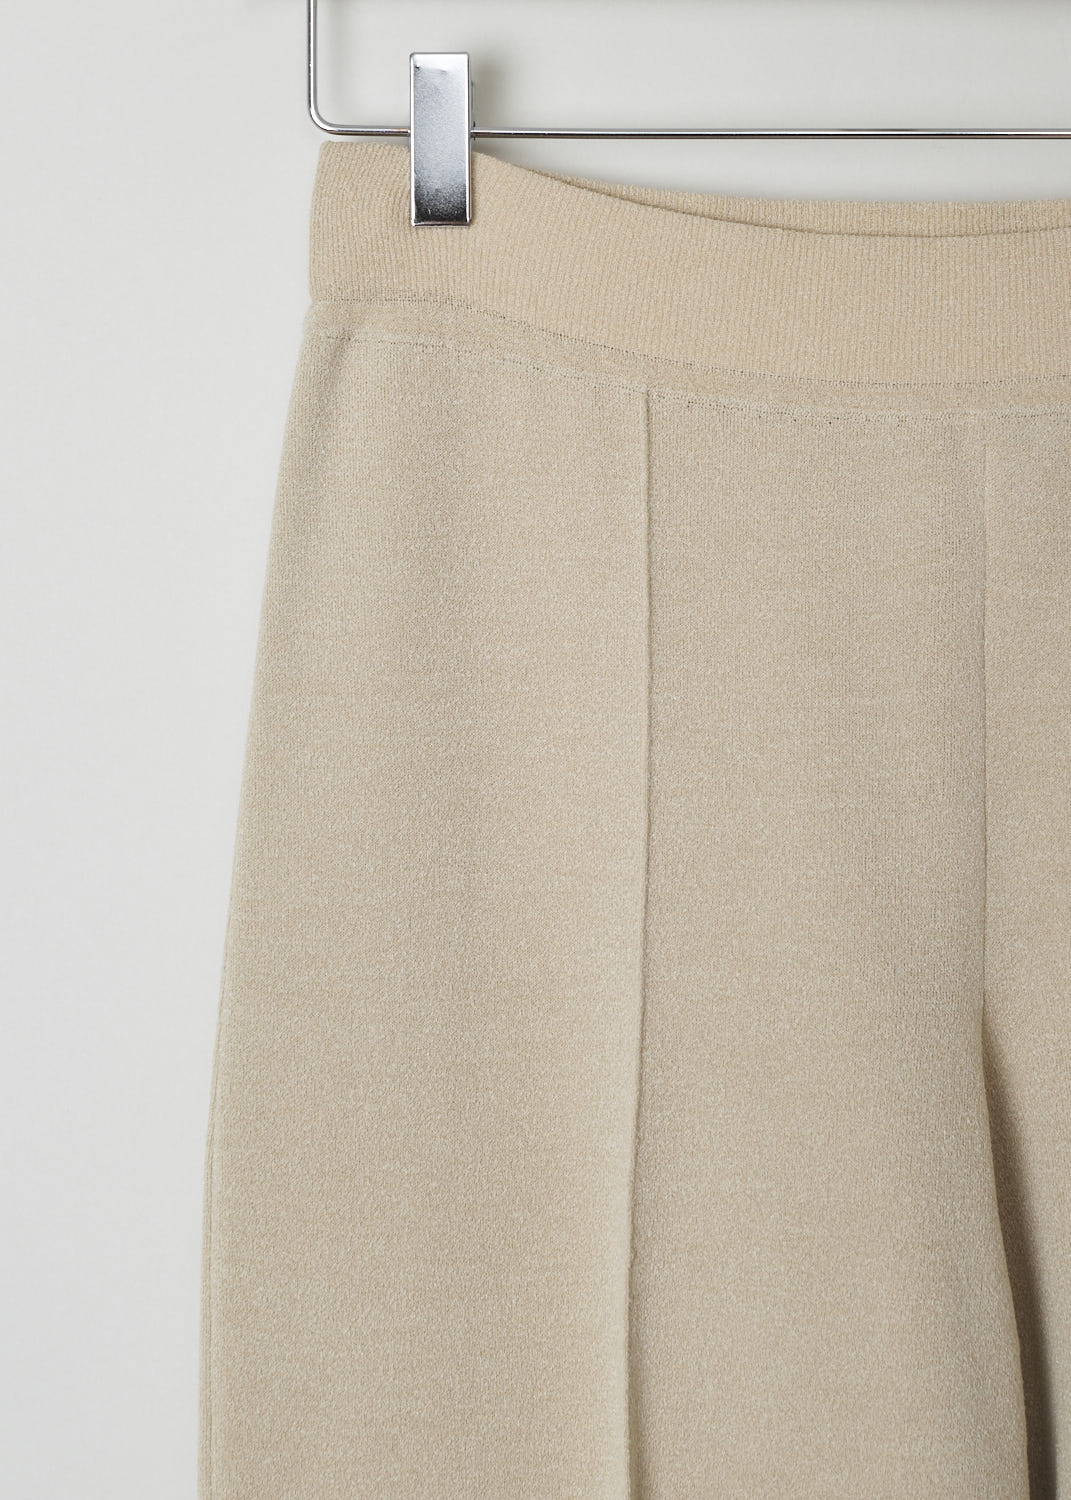 THE ROW, NUDE TAPERED TROUSERS, MARIA_PANT_3374Y205_NUDE, Beige, Detail, These nude slip-on trousers feature an elasticated waistline. The trousers are form fitting throughout. Centre seam can be found front and back, creating a paneled look.
